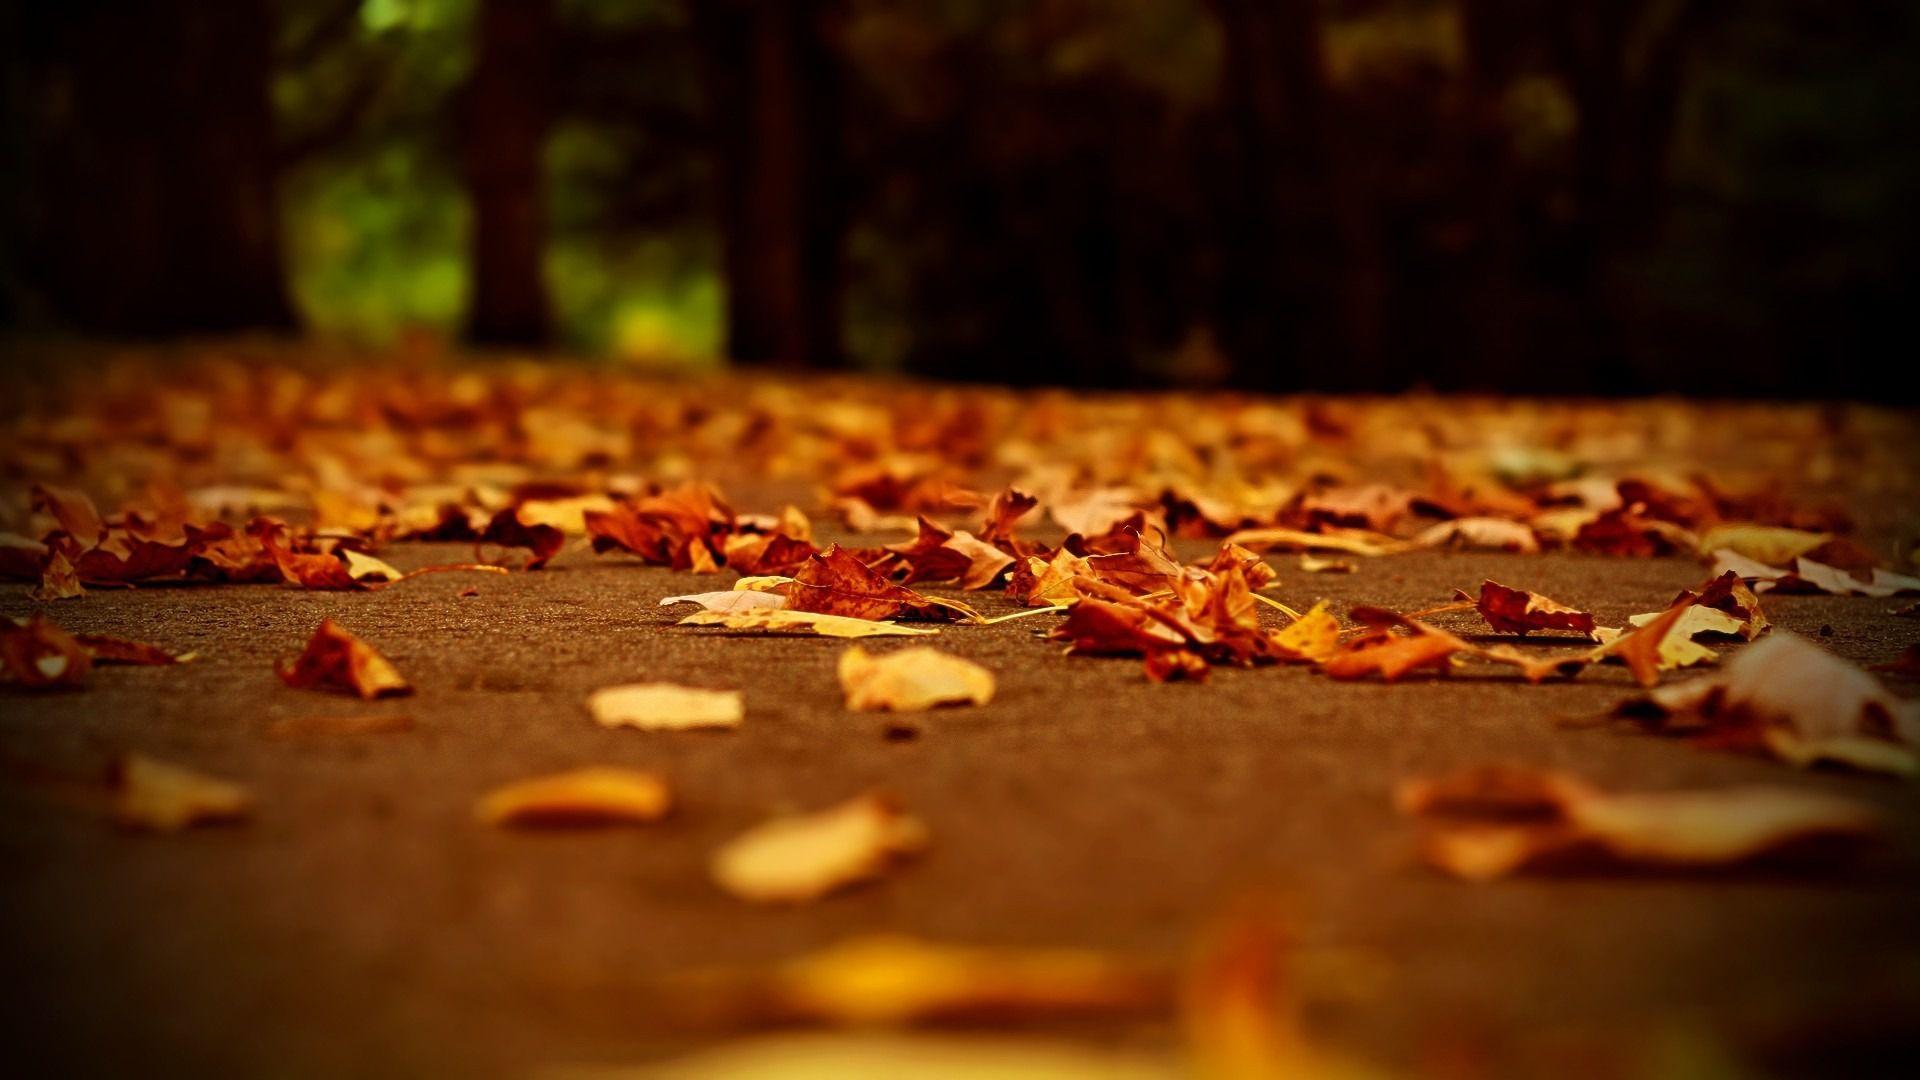 1920x1080 download wallpaper autumn, leaves, the ground, blur, bokeh screensavers and pictures for free in the resolution 1920x1080 - picture no. 10386 - Vintage fall